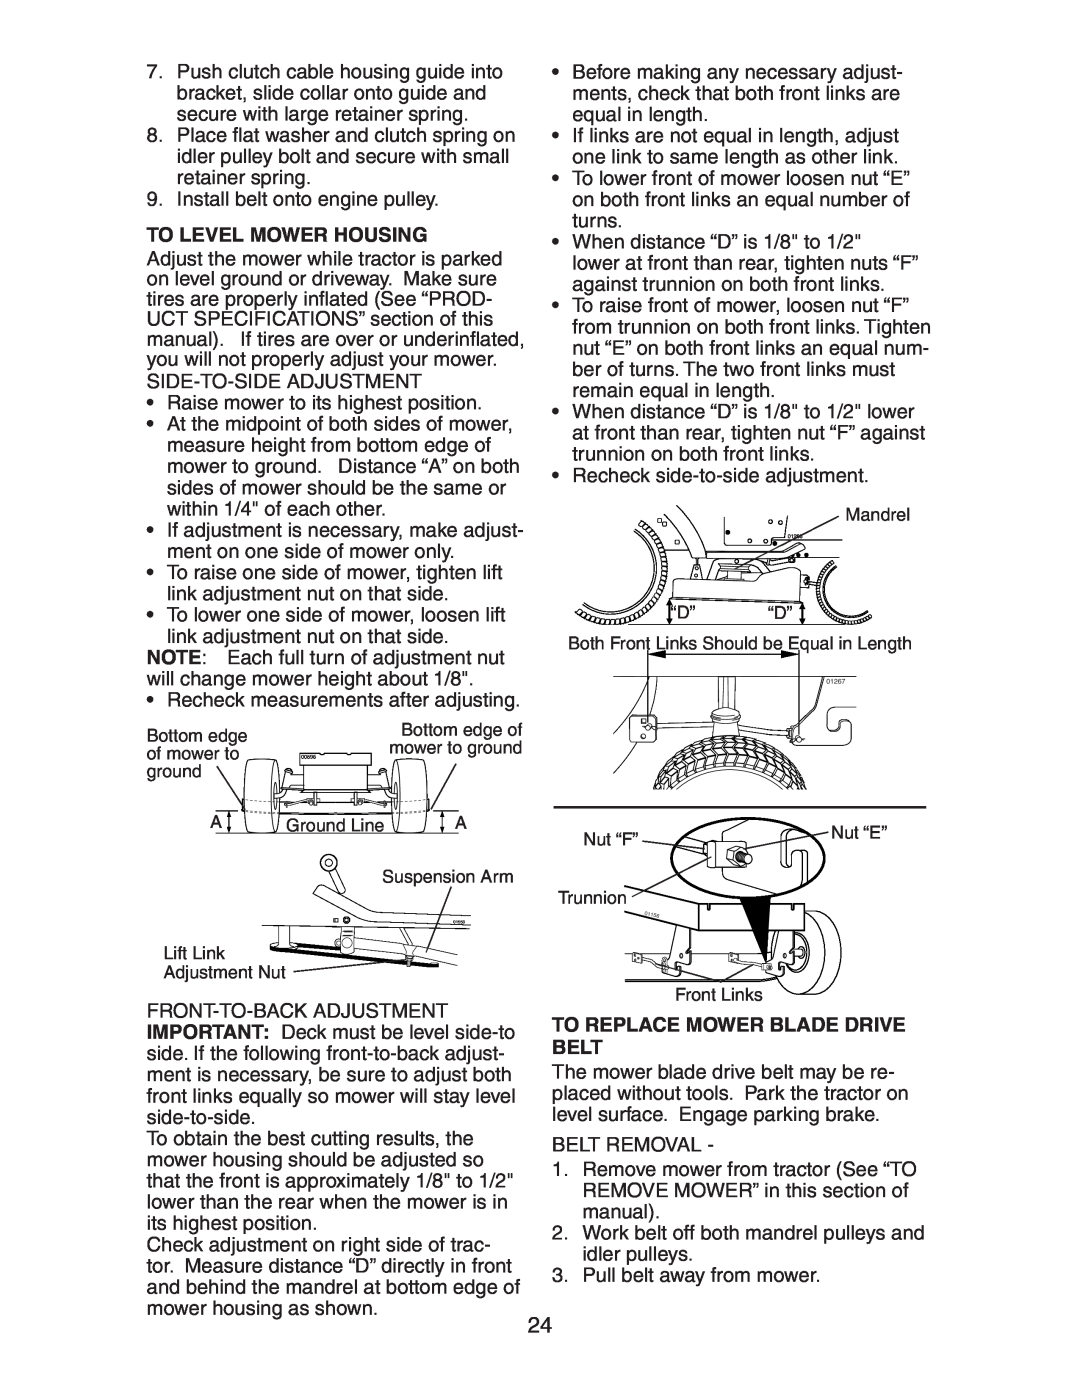 Craftsman 917.27582 owner manual To Level Mower Housing, To Replace Mower Blade Drive Belt 